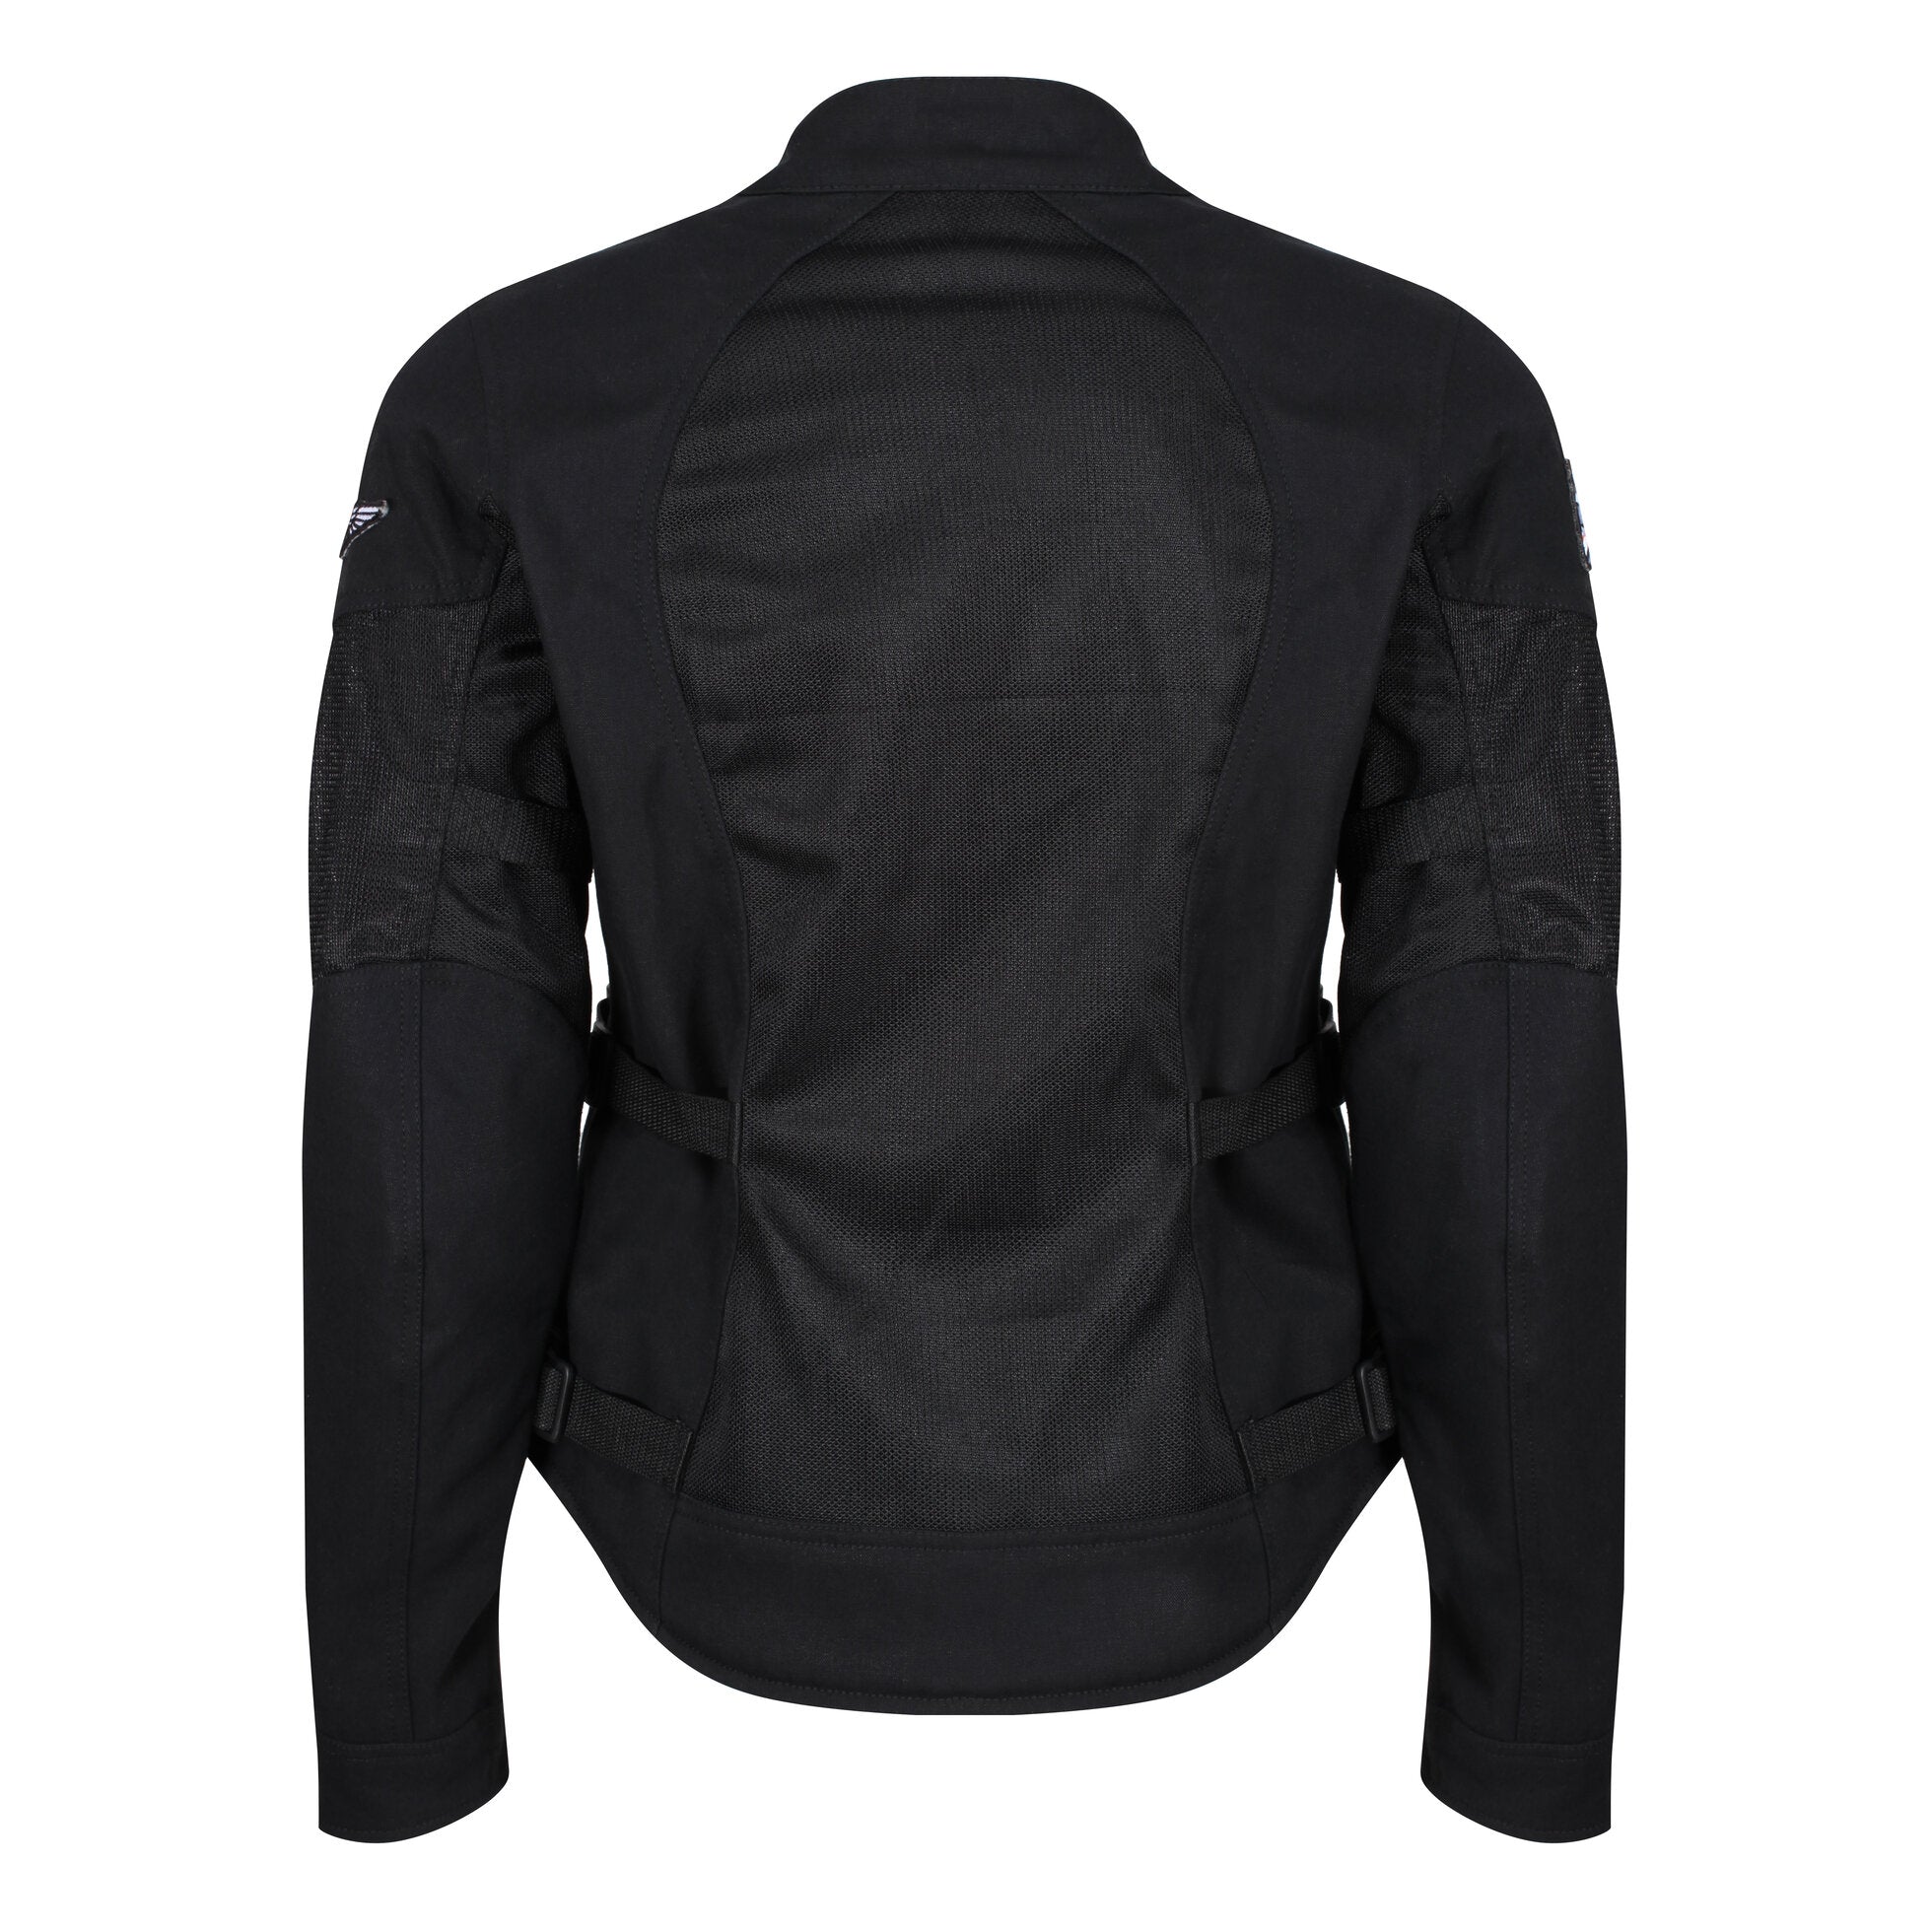 Black summer mesh women&#39;s motorcycle jacket from the back